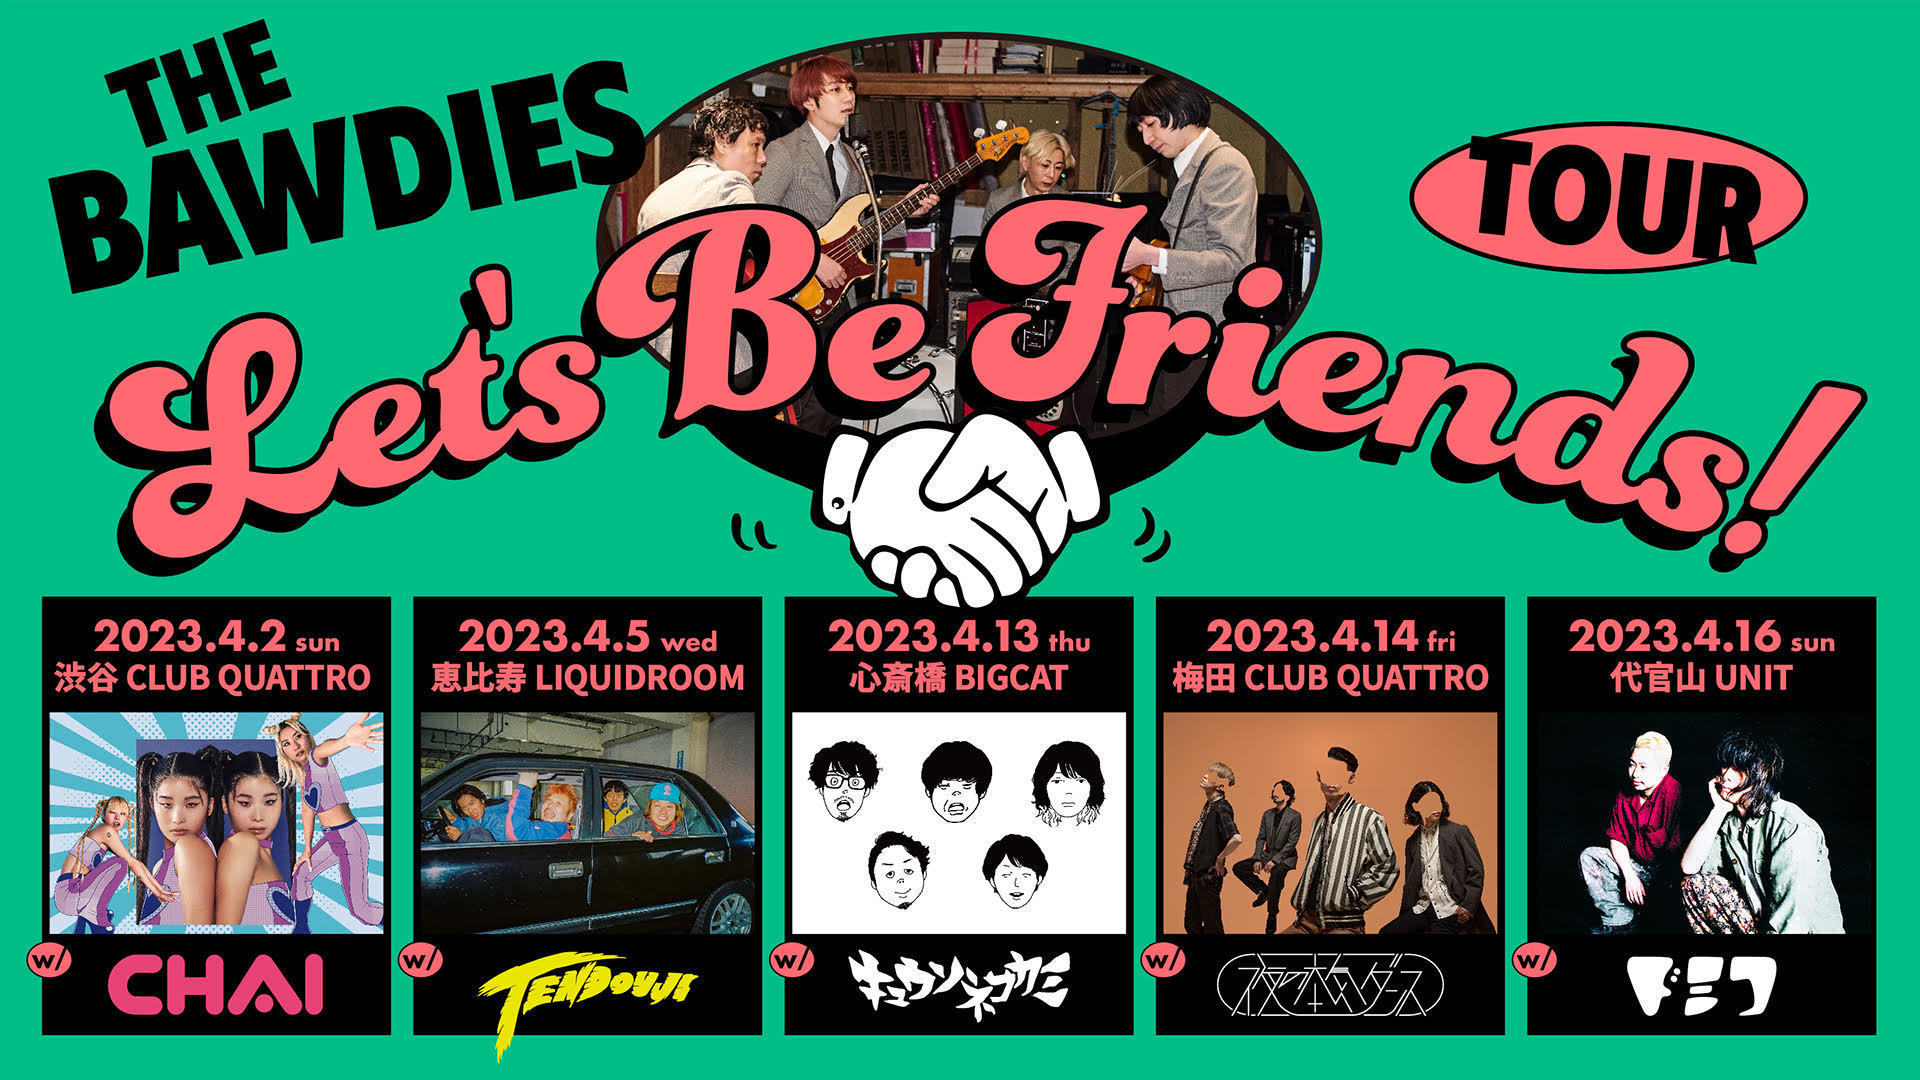 「LET'S BE FRIENDS! TOUR」チケット一般発売開始！